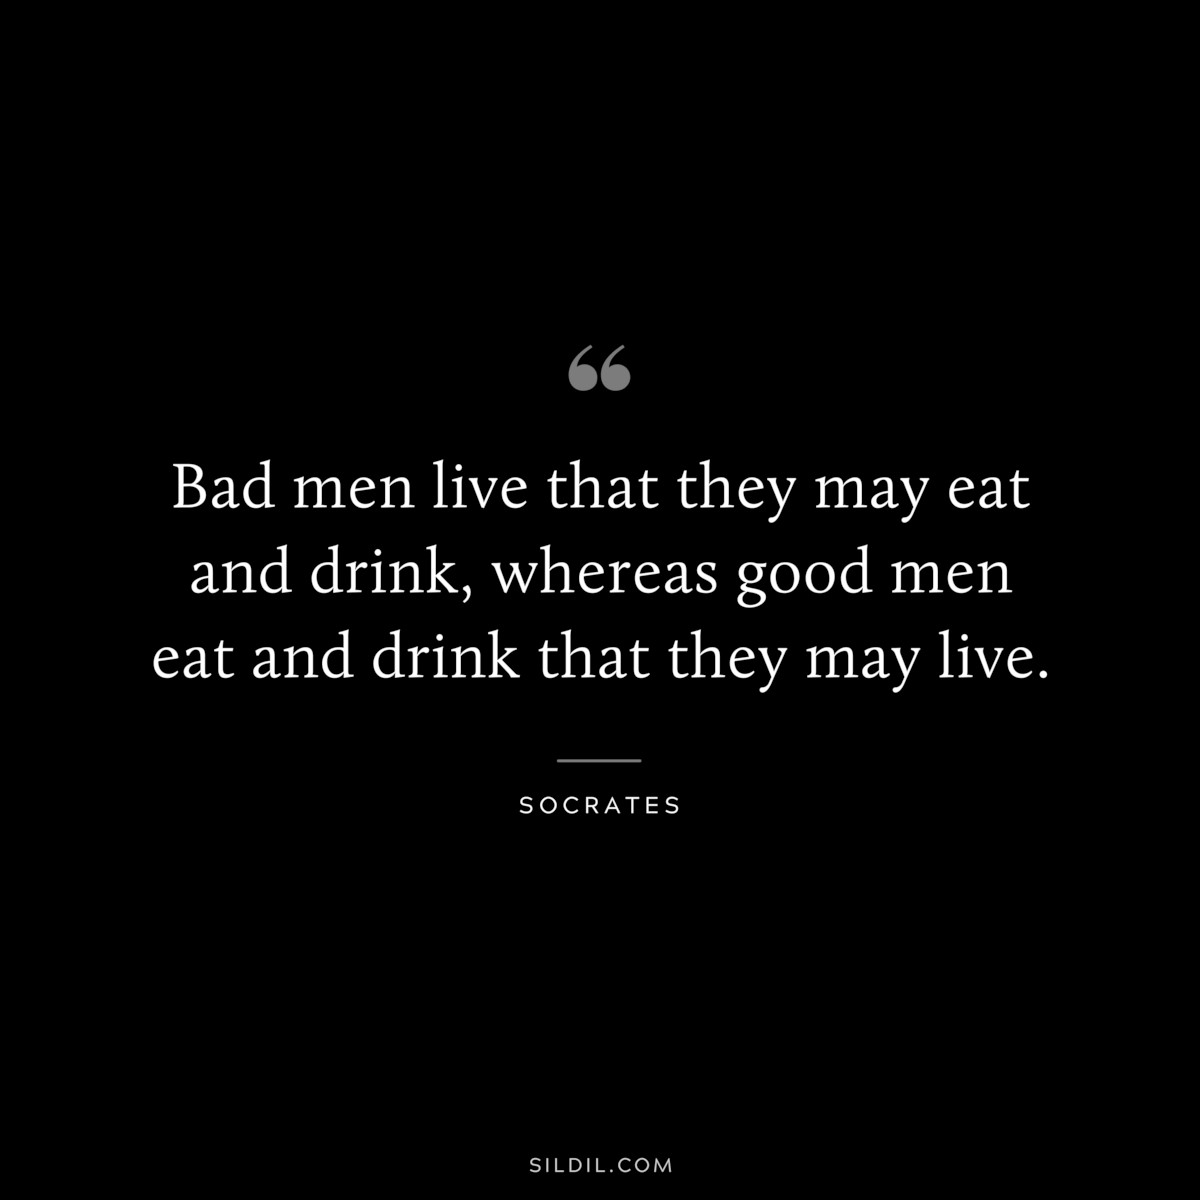 Bad men live that they may eat and drink, whereas good men eat and drink that they may live. ― Socrates